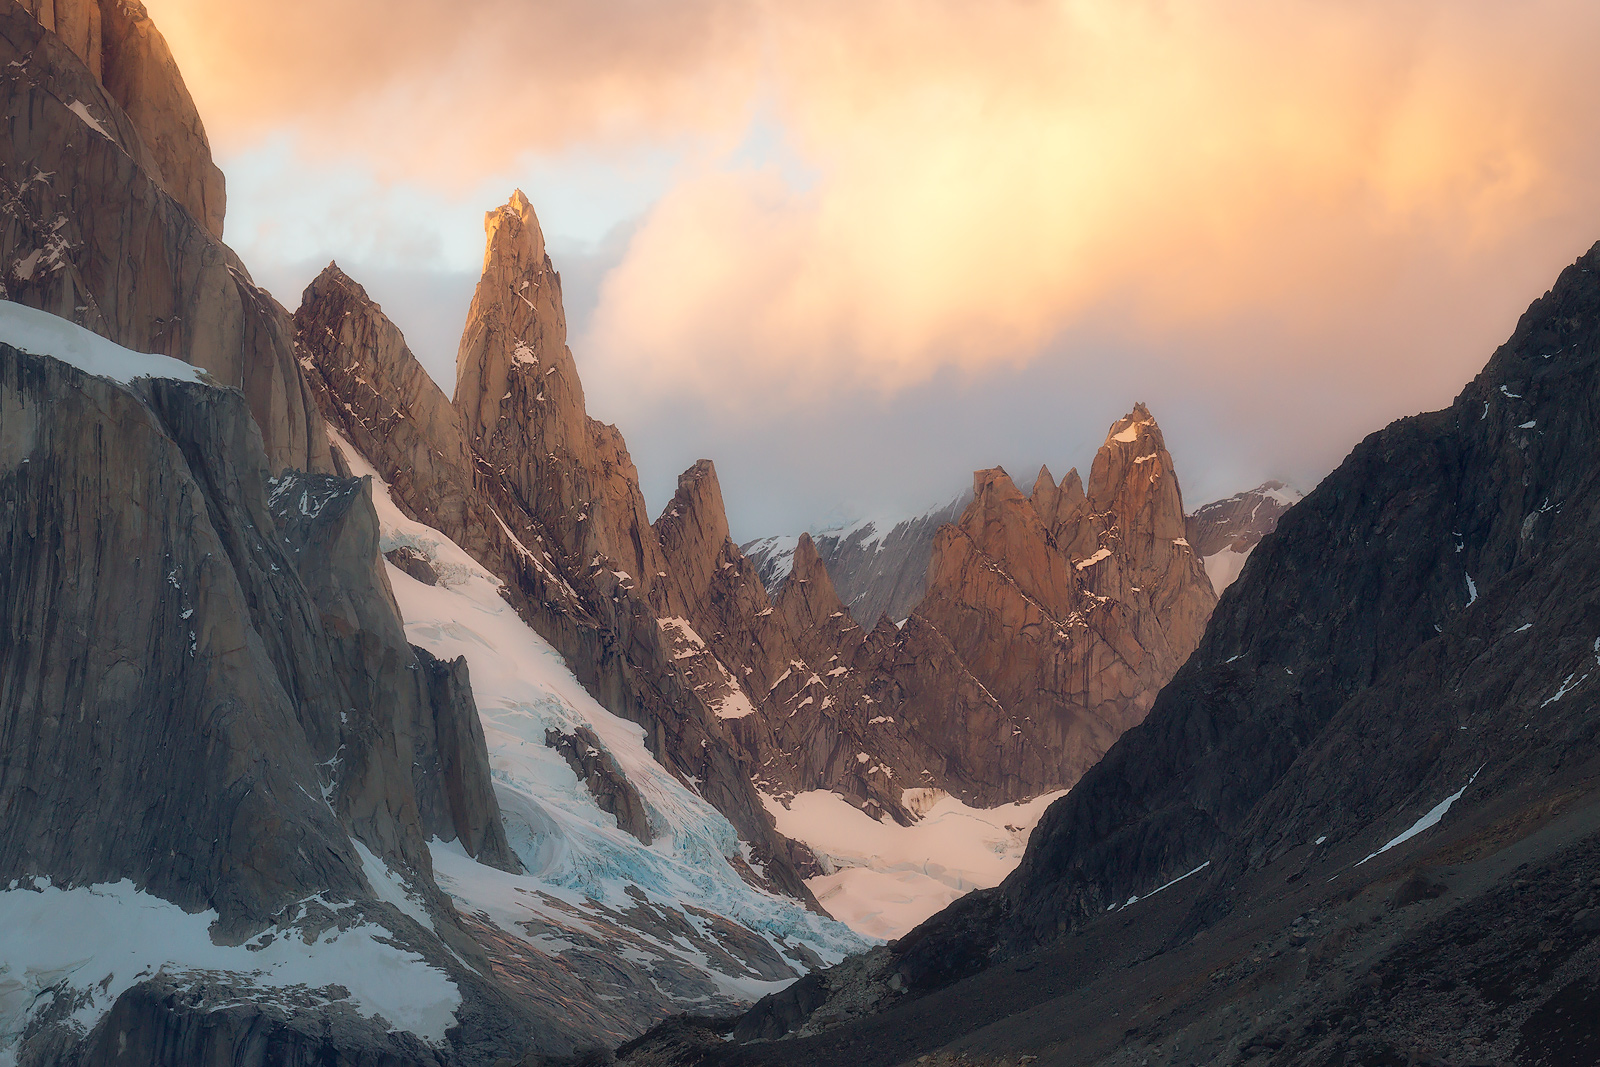 Clouds lighting up over Cerro Torre as seen from Laguna Torre.